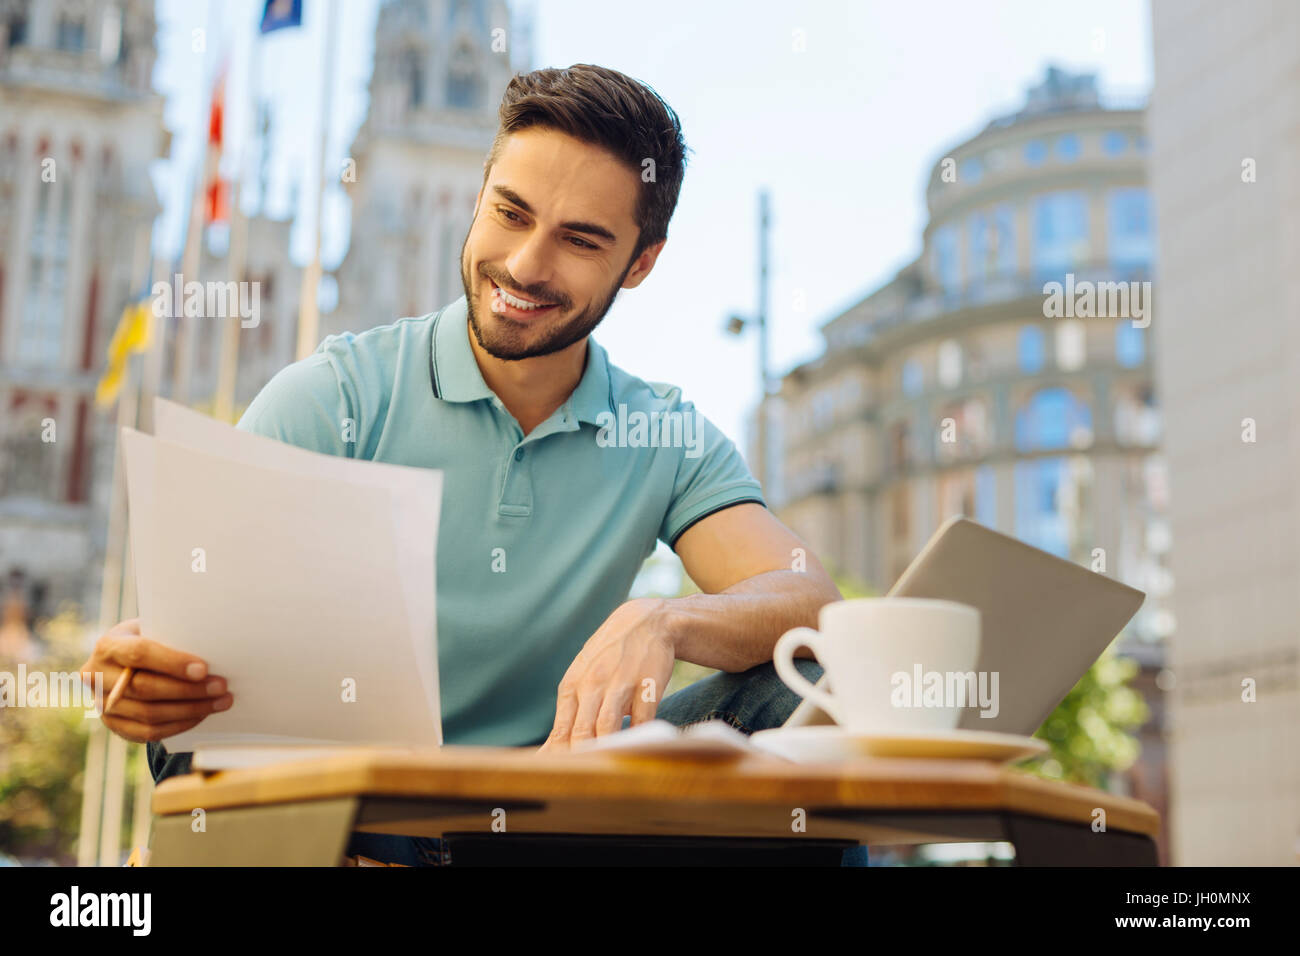 Committed handsome man reading the documents carefully Stock Photo